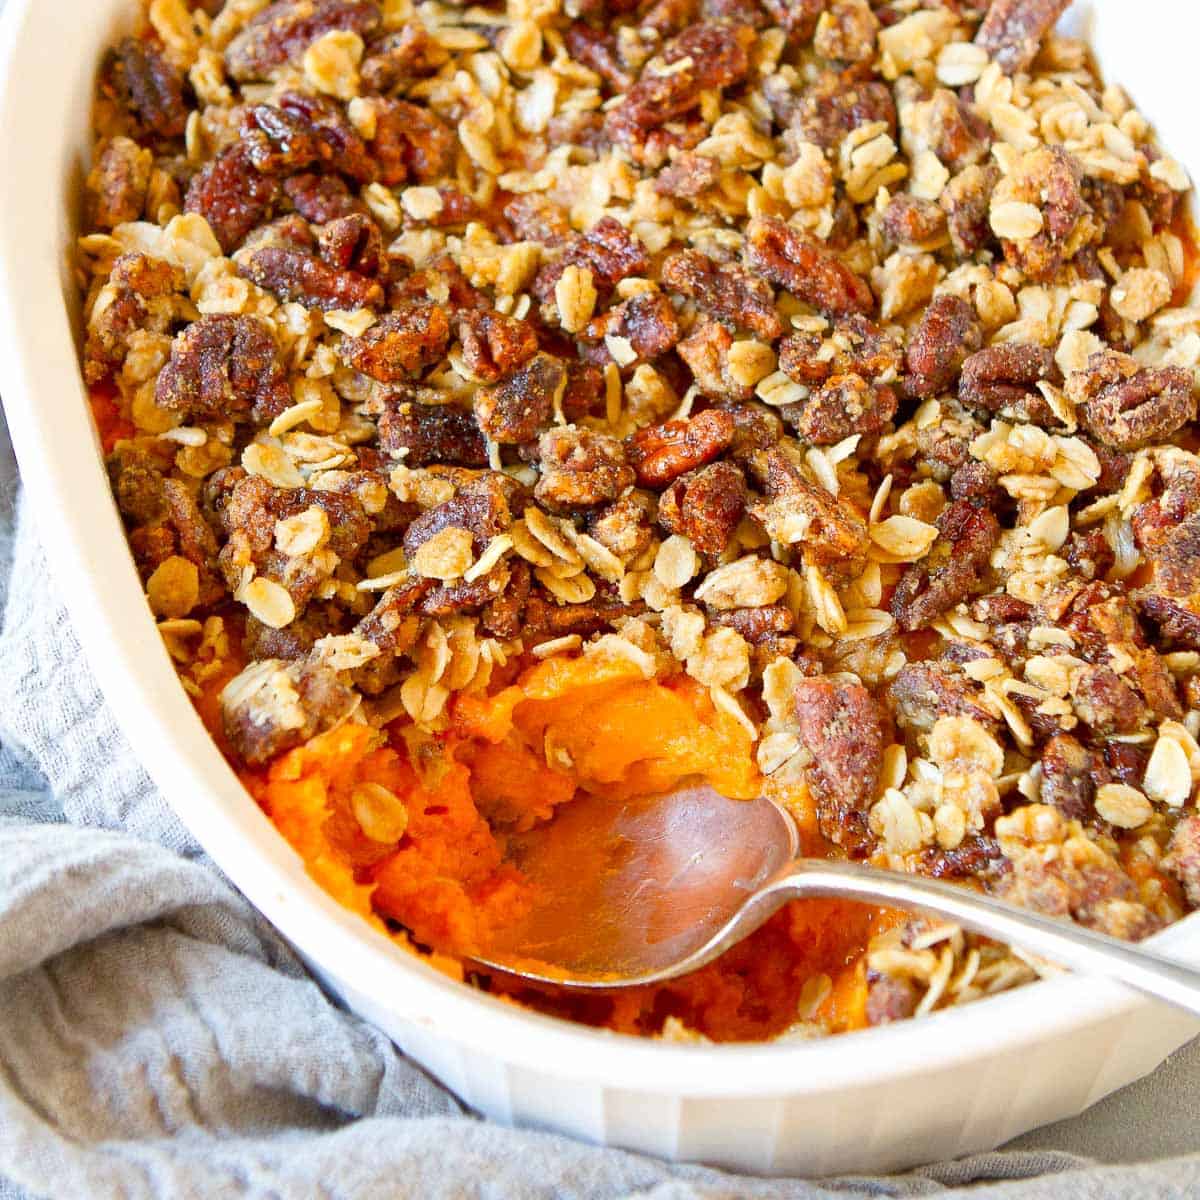 Sweet potato casserole with pecan topping in a white casserole dish, with a silver spoon. Gray napkin underneath.